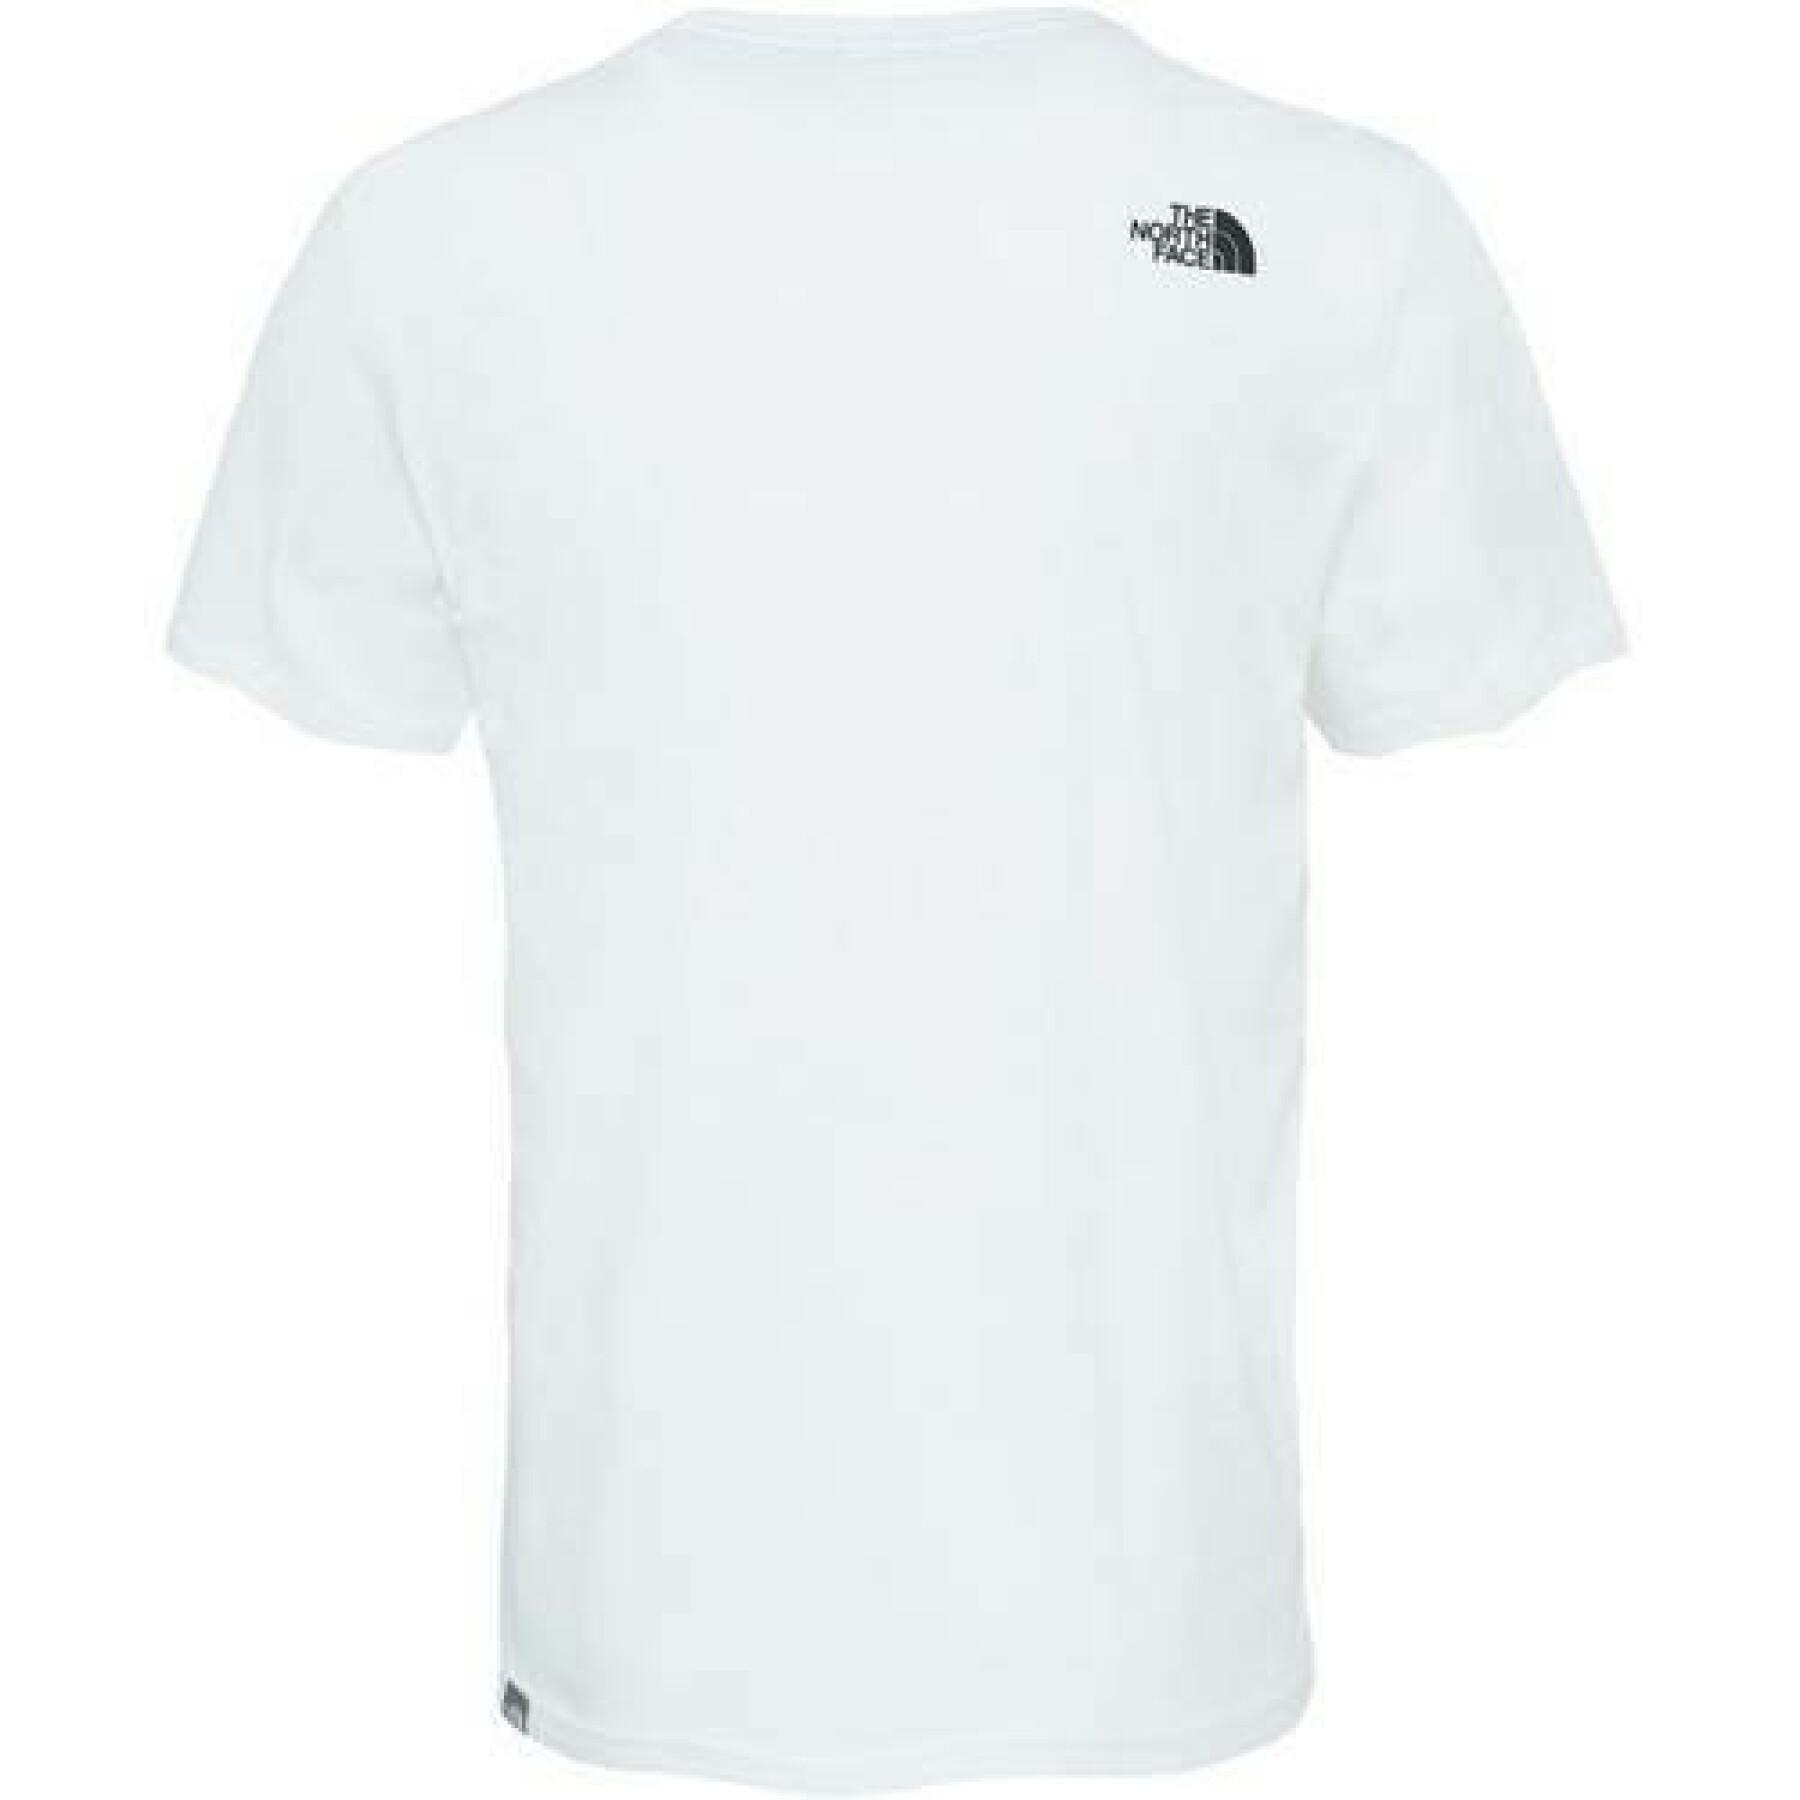 Klassisches T-Shirt The North Face Woodcut